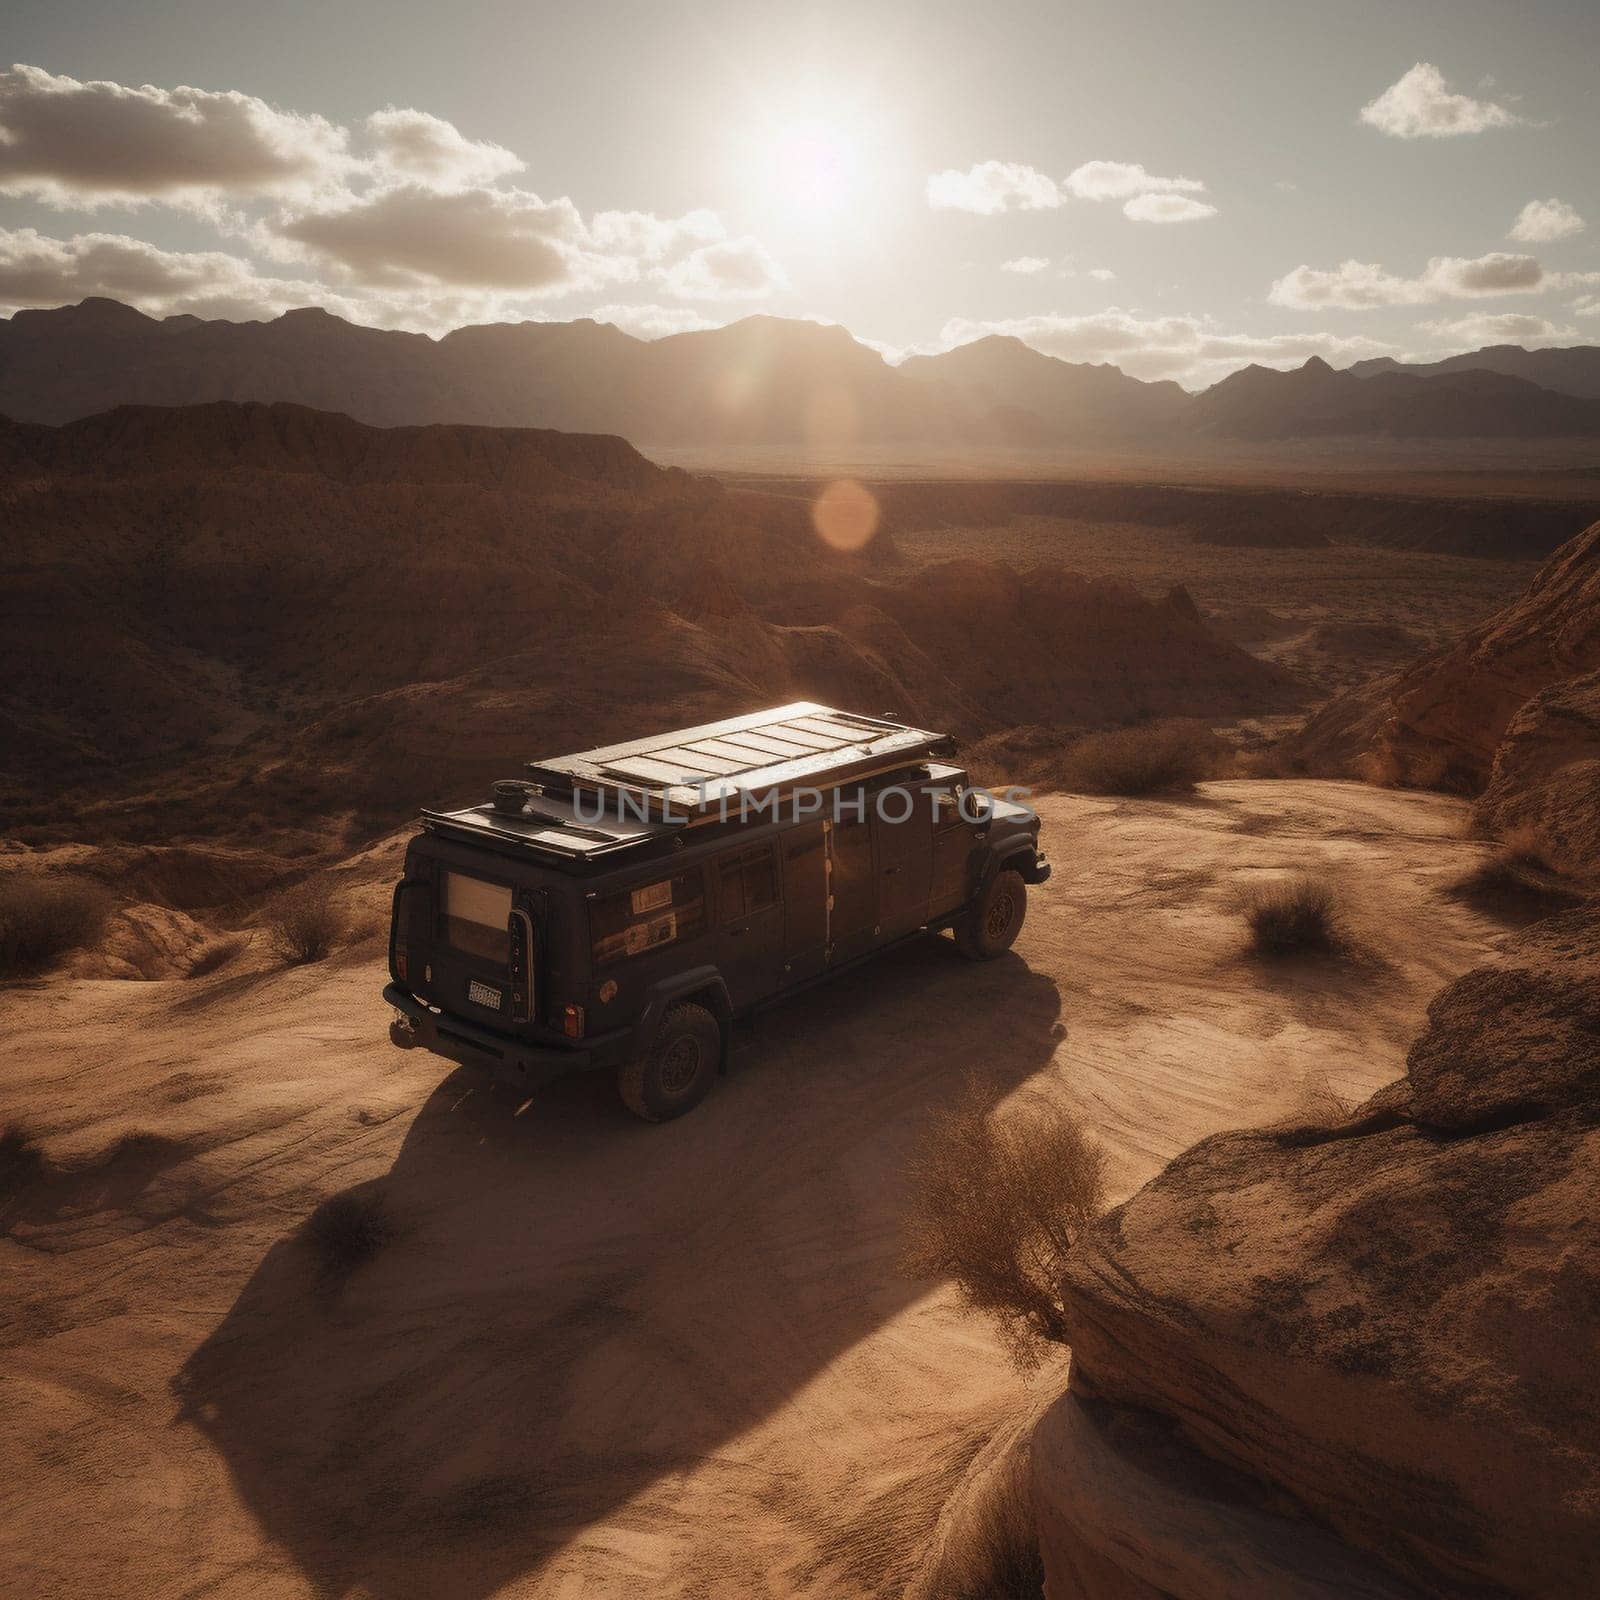 Rugged 4x4 Camper Van on the Edge of a Remote Canyon by Sahin